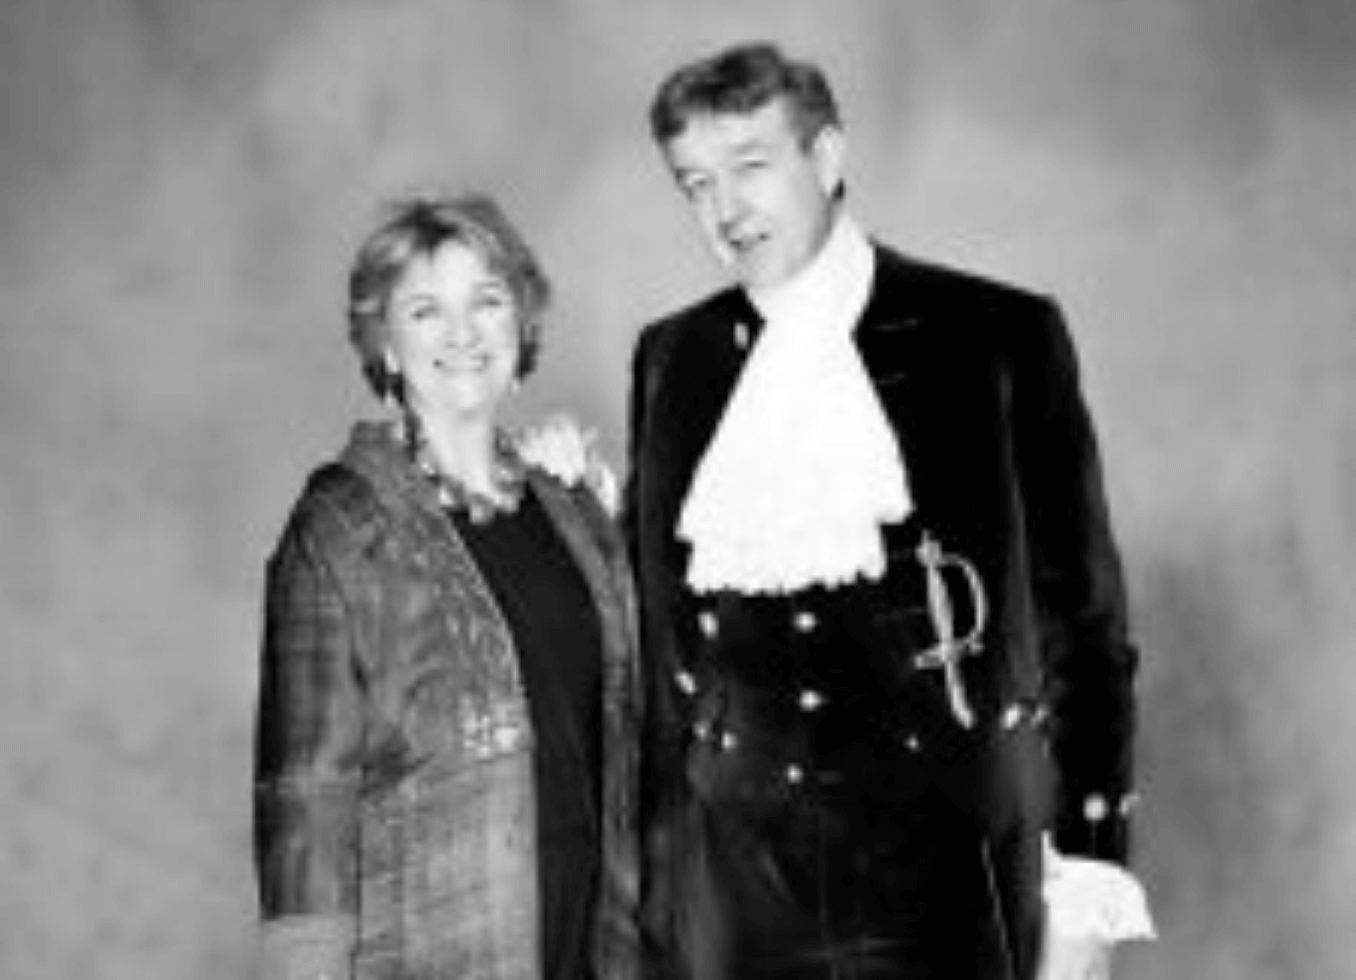 Lord Charles Cecil and Lady Virginia Cecil